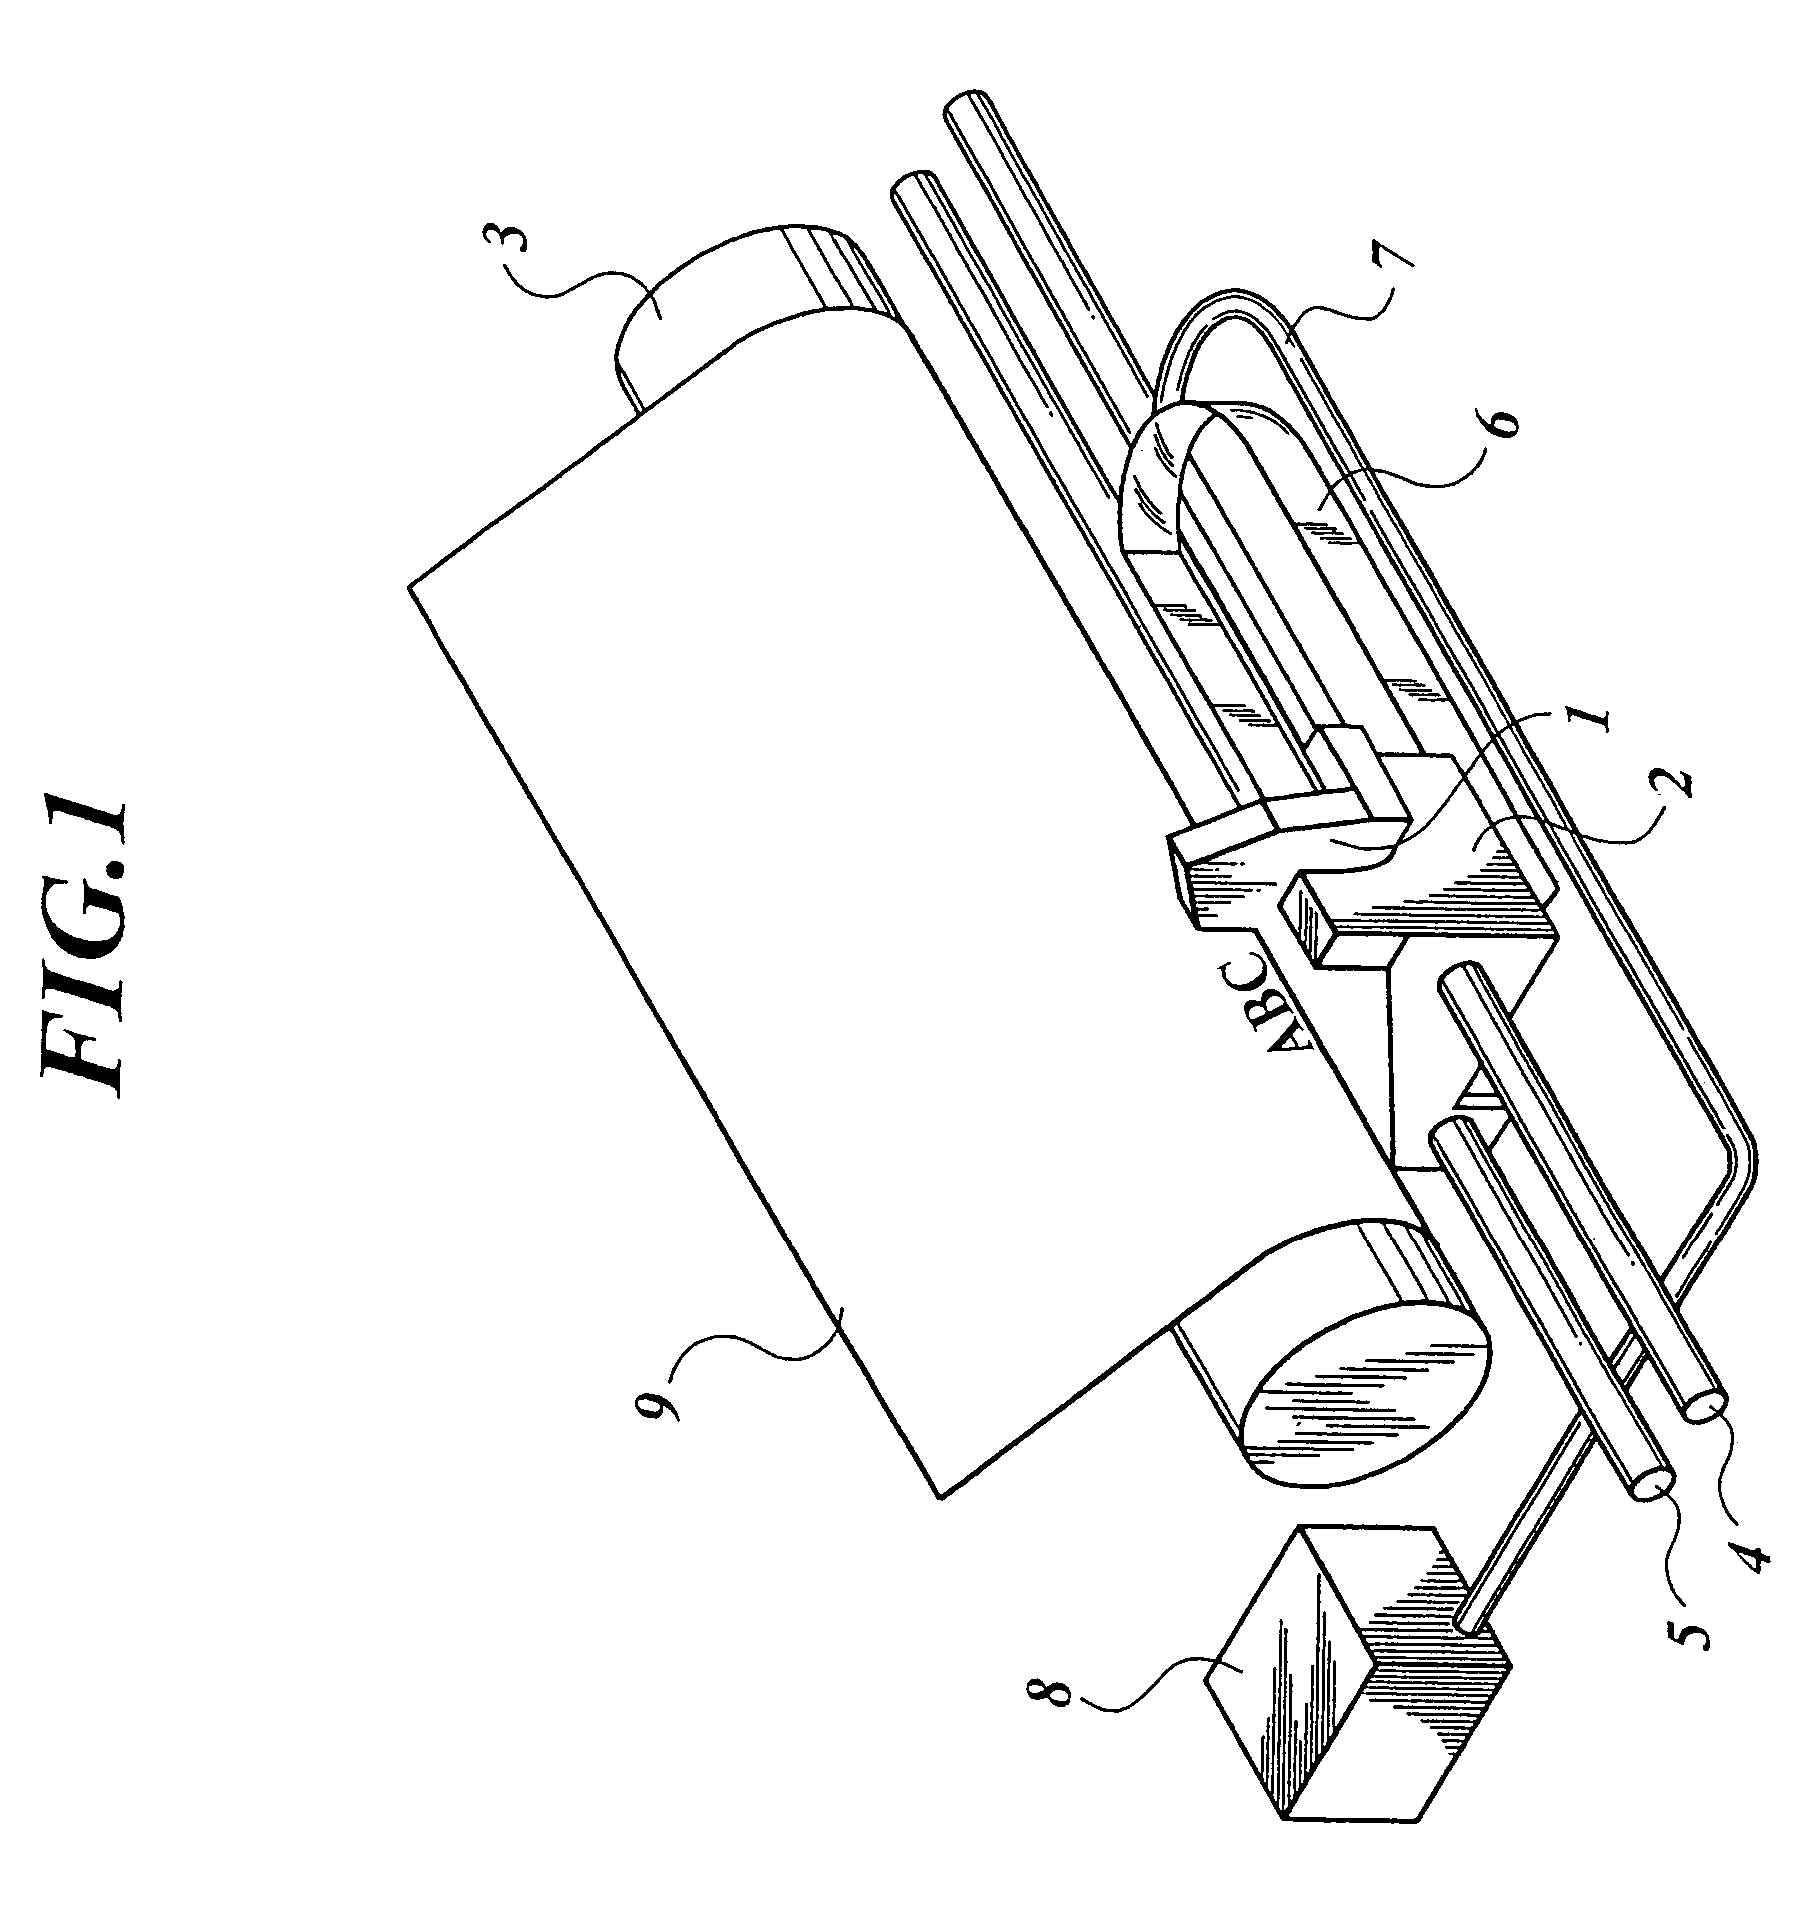 Ink jet recording apparatus and ink jet recording method